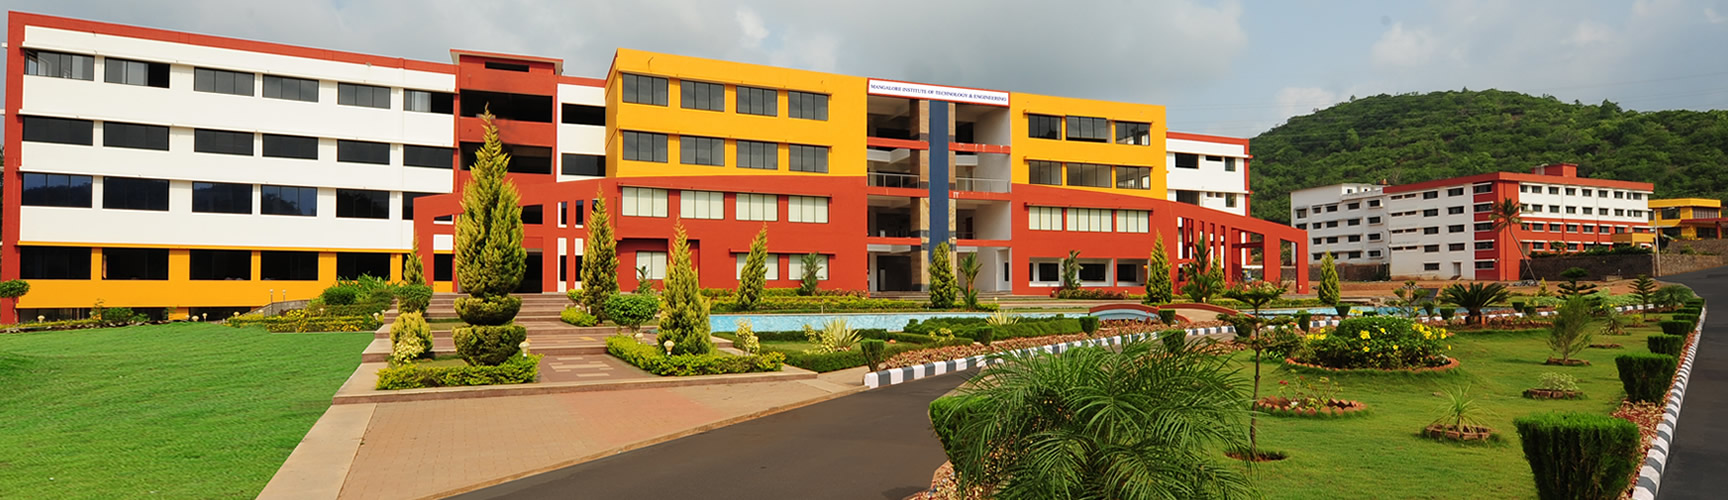 Mangalore Institute Of Technology And Engineering Image